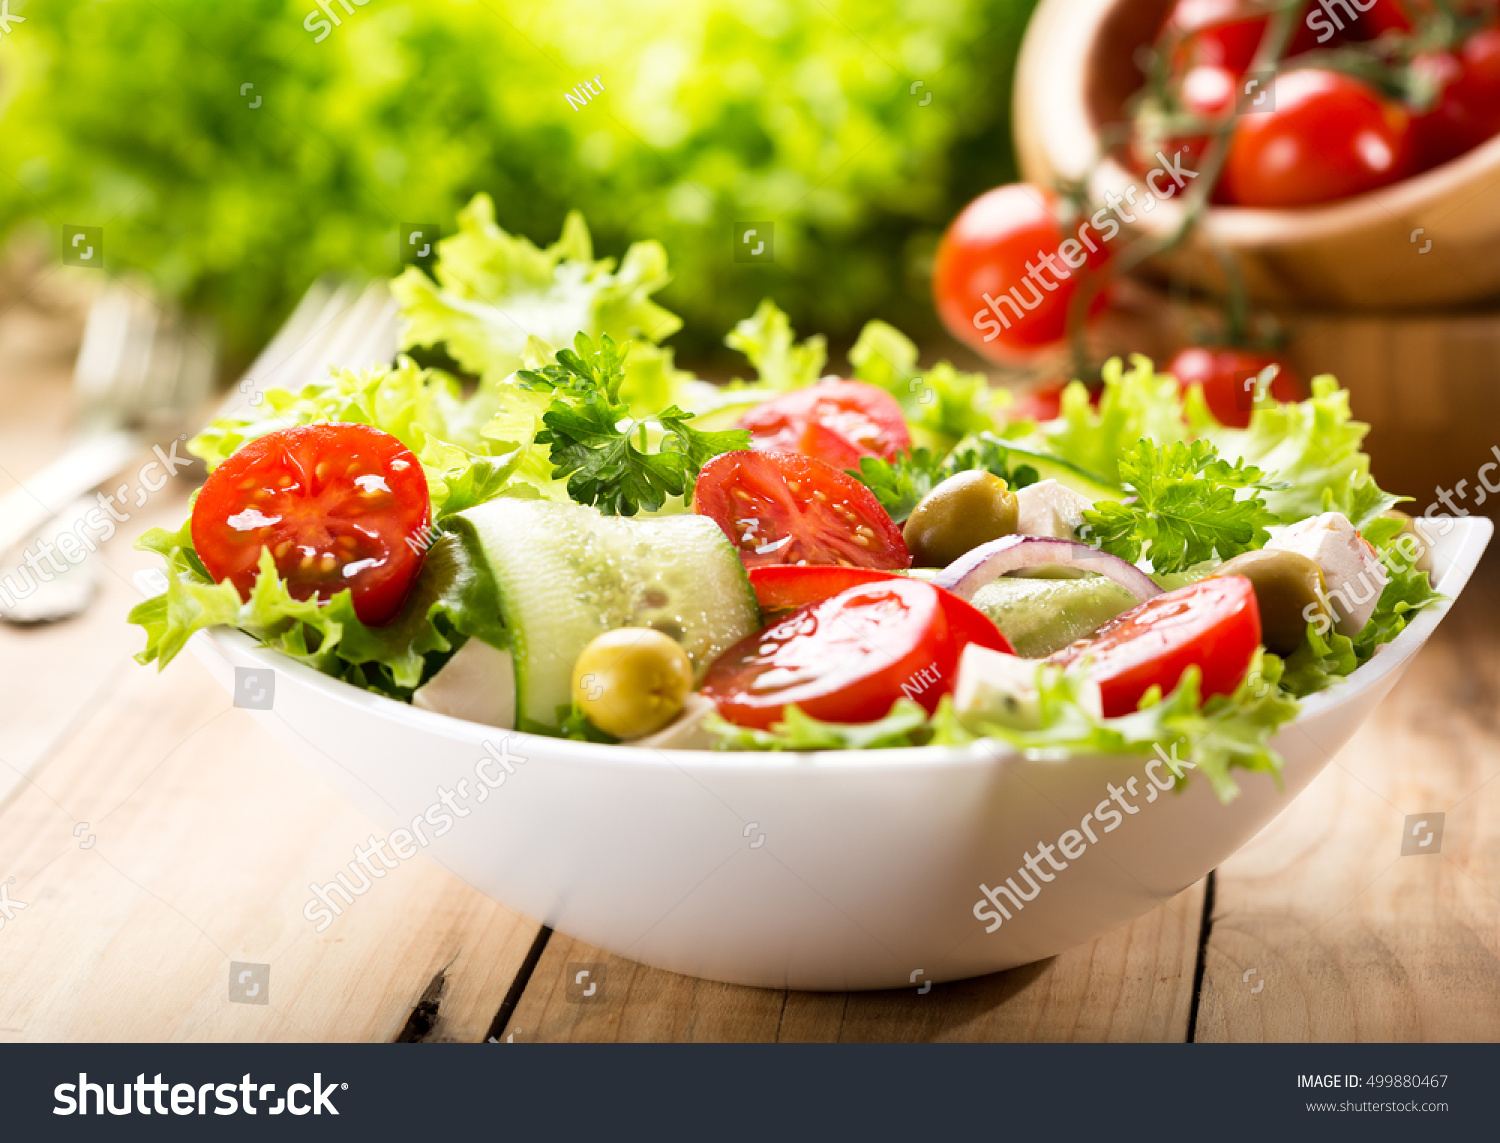 bowl of salad with vegetables and greens on wooden table #499880467